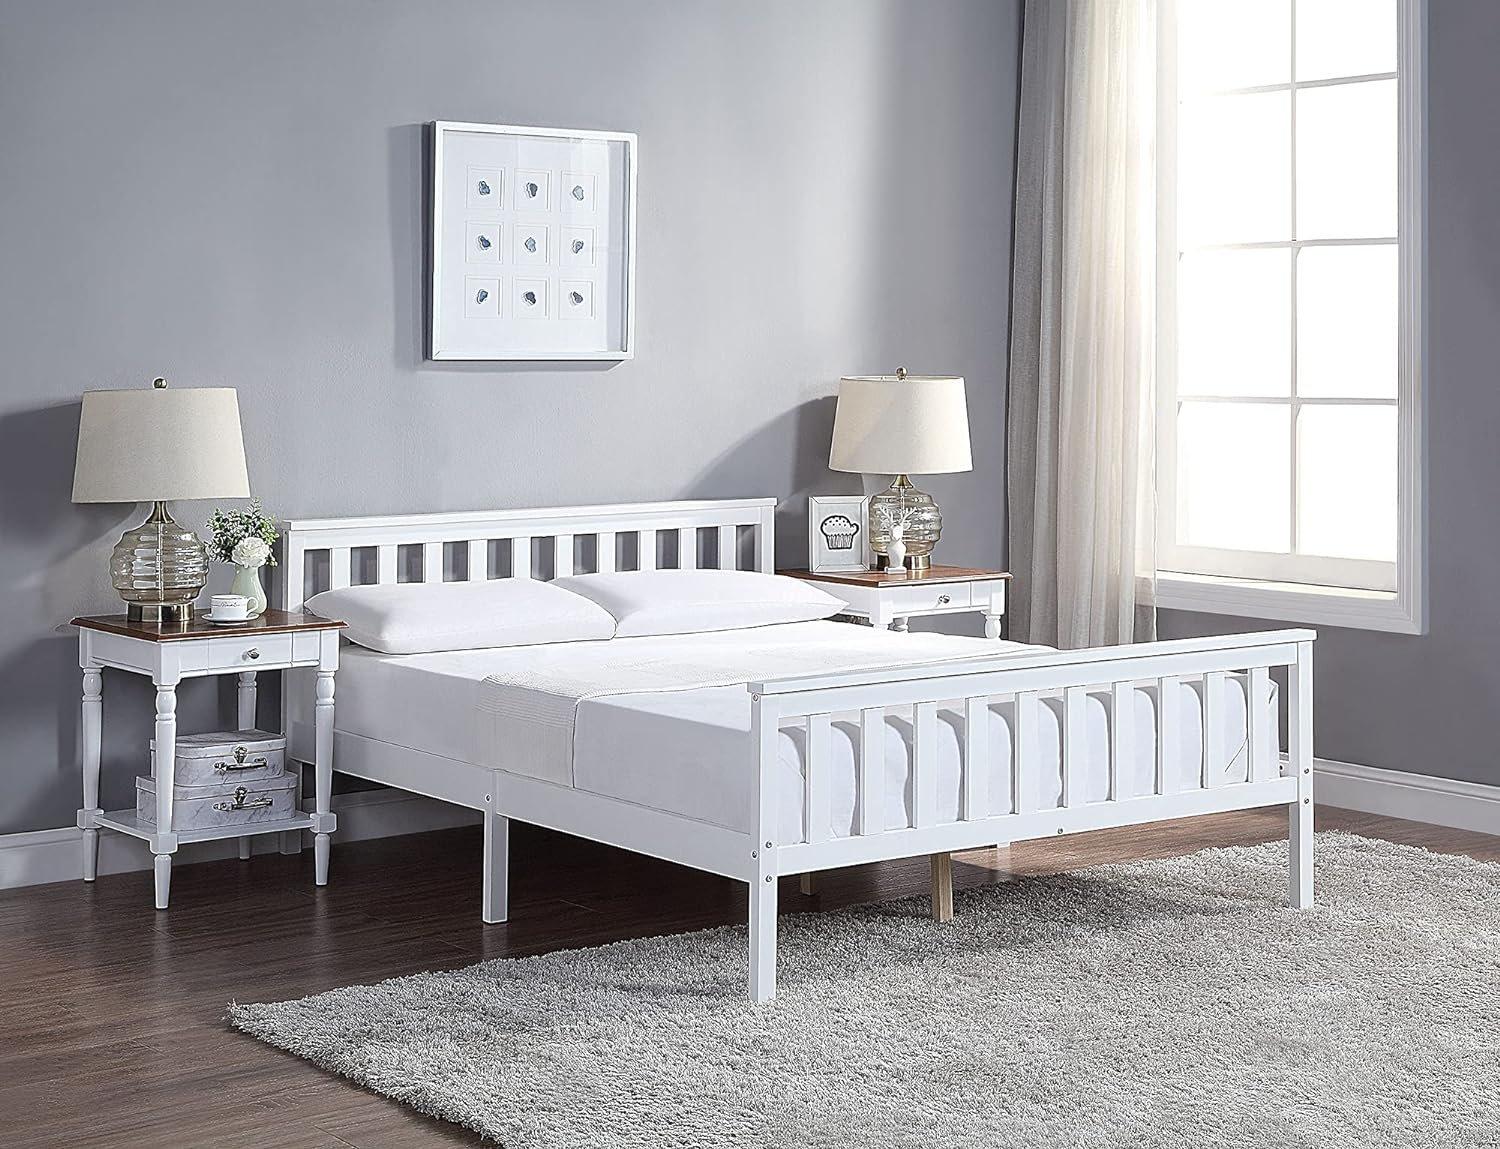 Wooden Double Bed Frame With Pocket Sprung Mattress